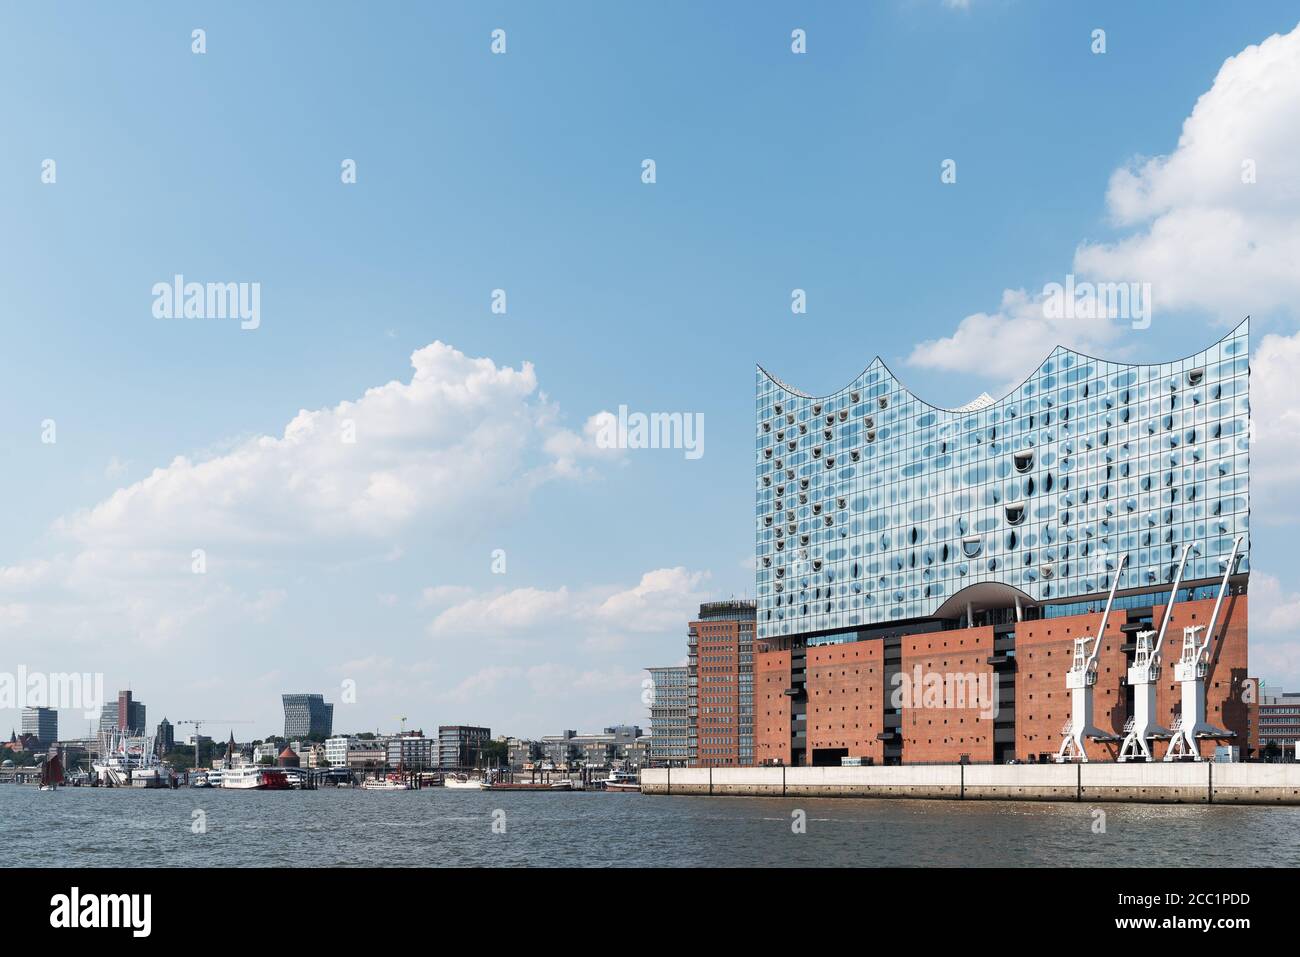 2020-08-16 Hamburg, Germany: cityscape with Elbe River, waterfront and Elbphilharmonie concert hall against beautiful blue summer sky Stock Photo